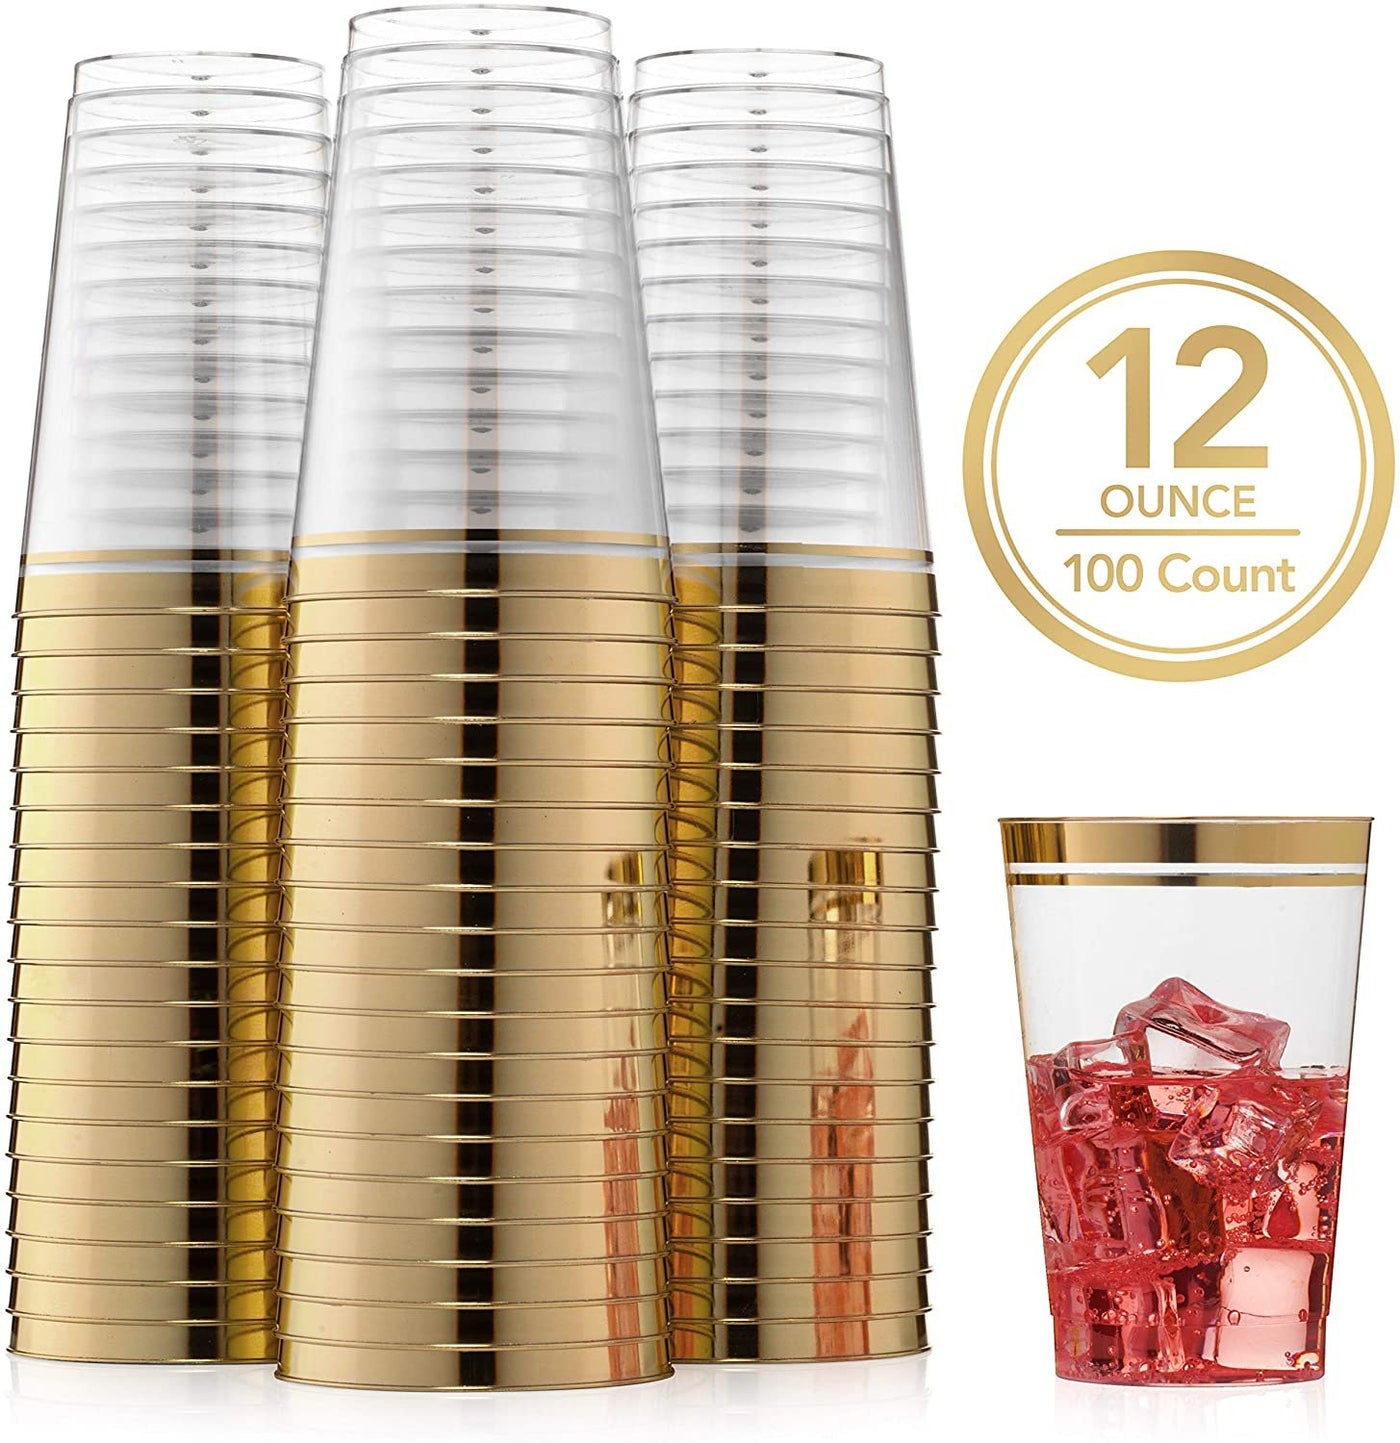 100 Premium Gold Rimmed Disposable Clear Plastic Cups 12 Ounce - Name Brand Corner